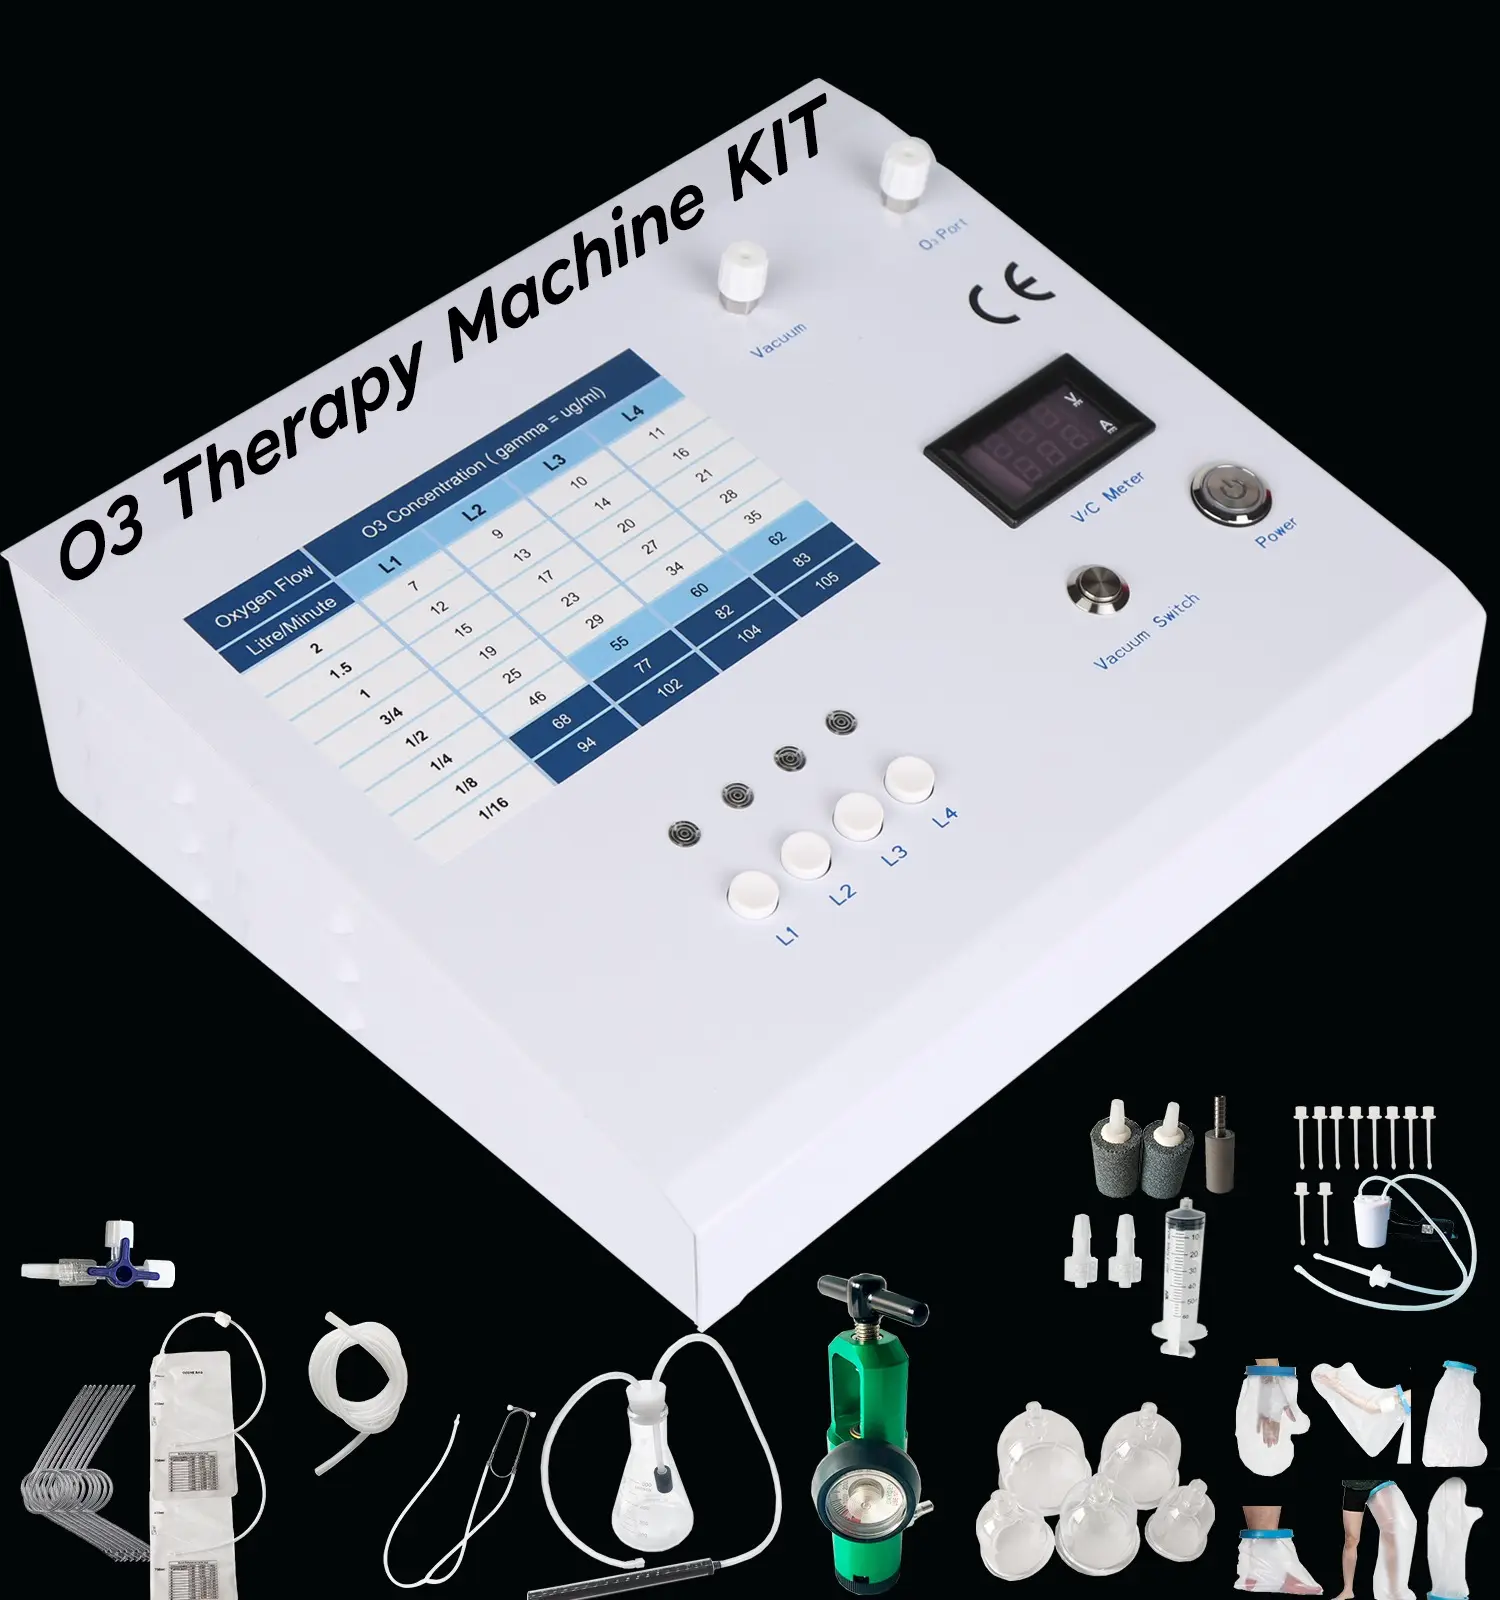 Hot sale Medical Ozone Machine Kit Home Clinic Use Therapy Medical Ozone Generator